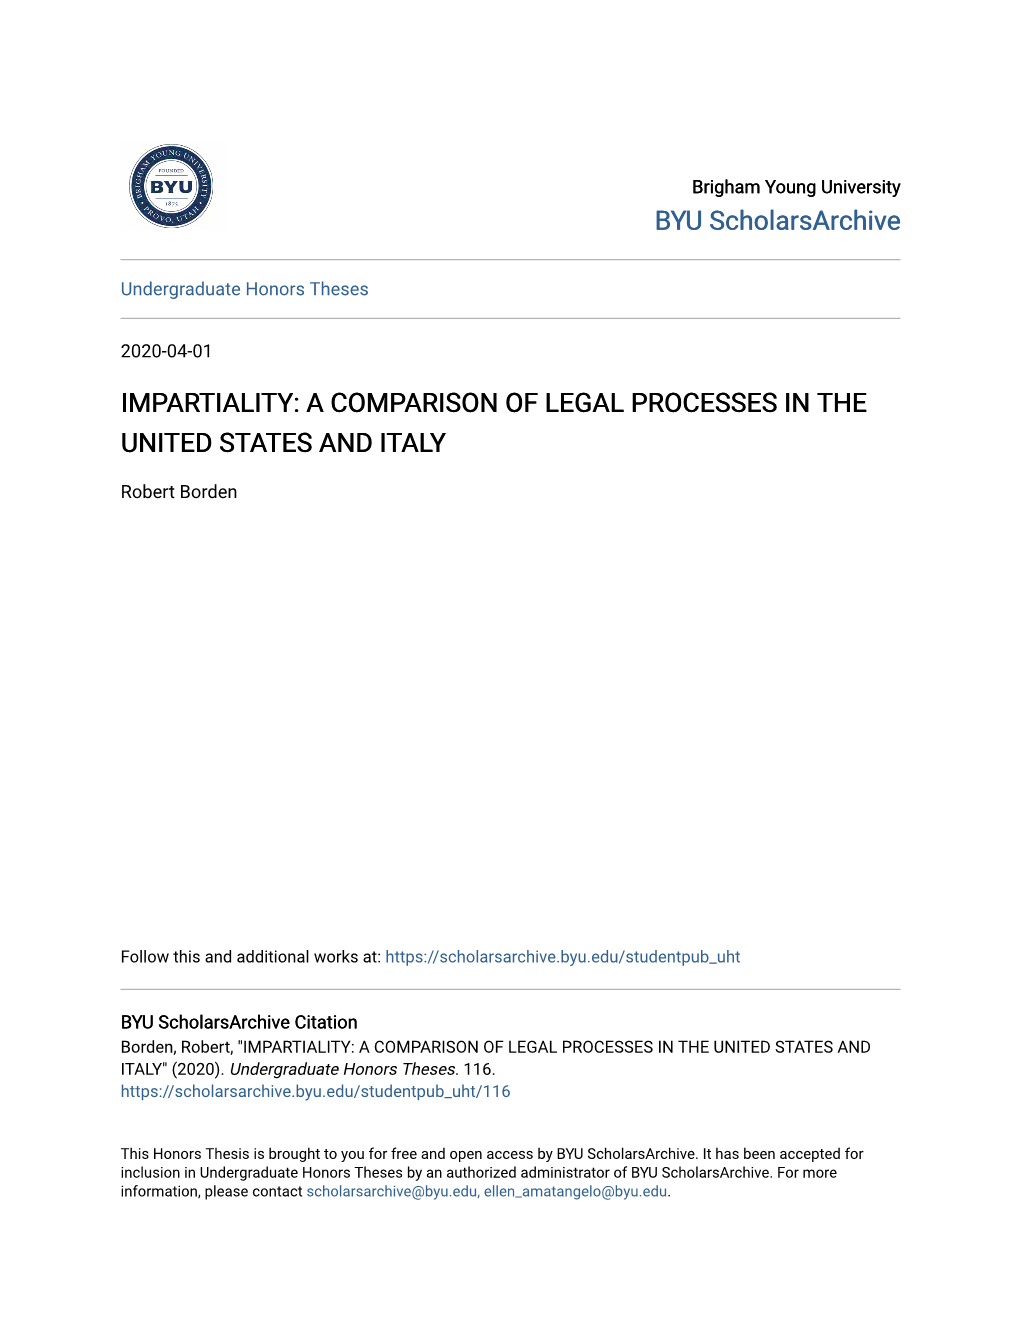 Impartiality: a Comparison of Legal Processes in the United States and Italy